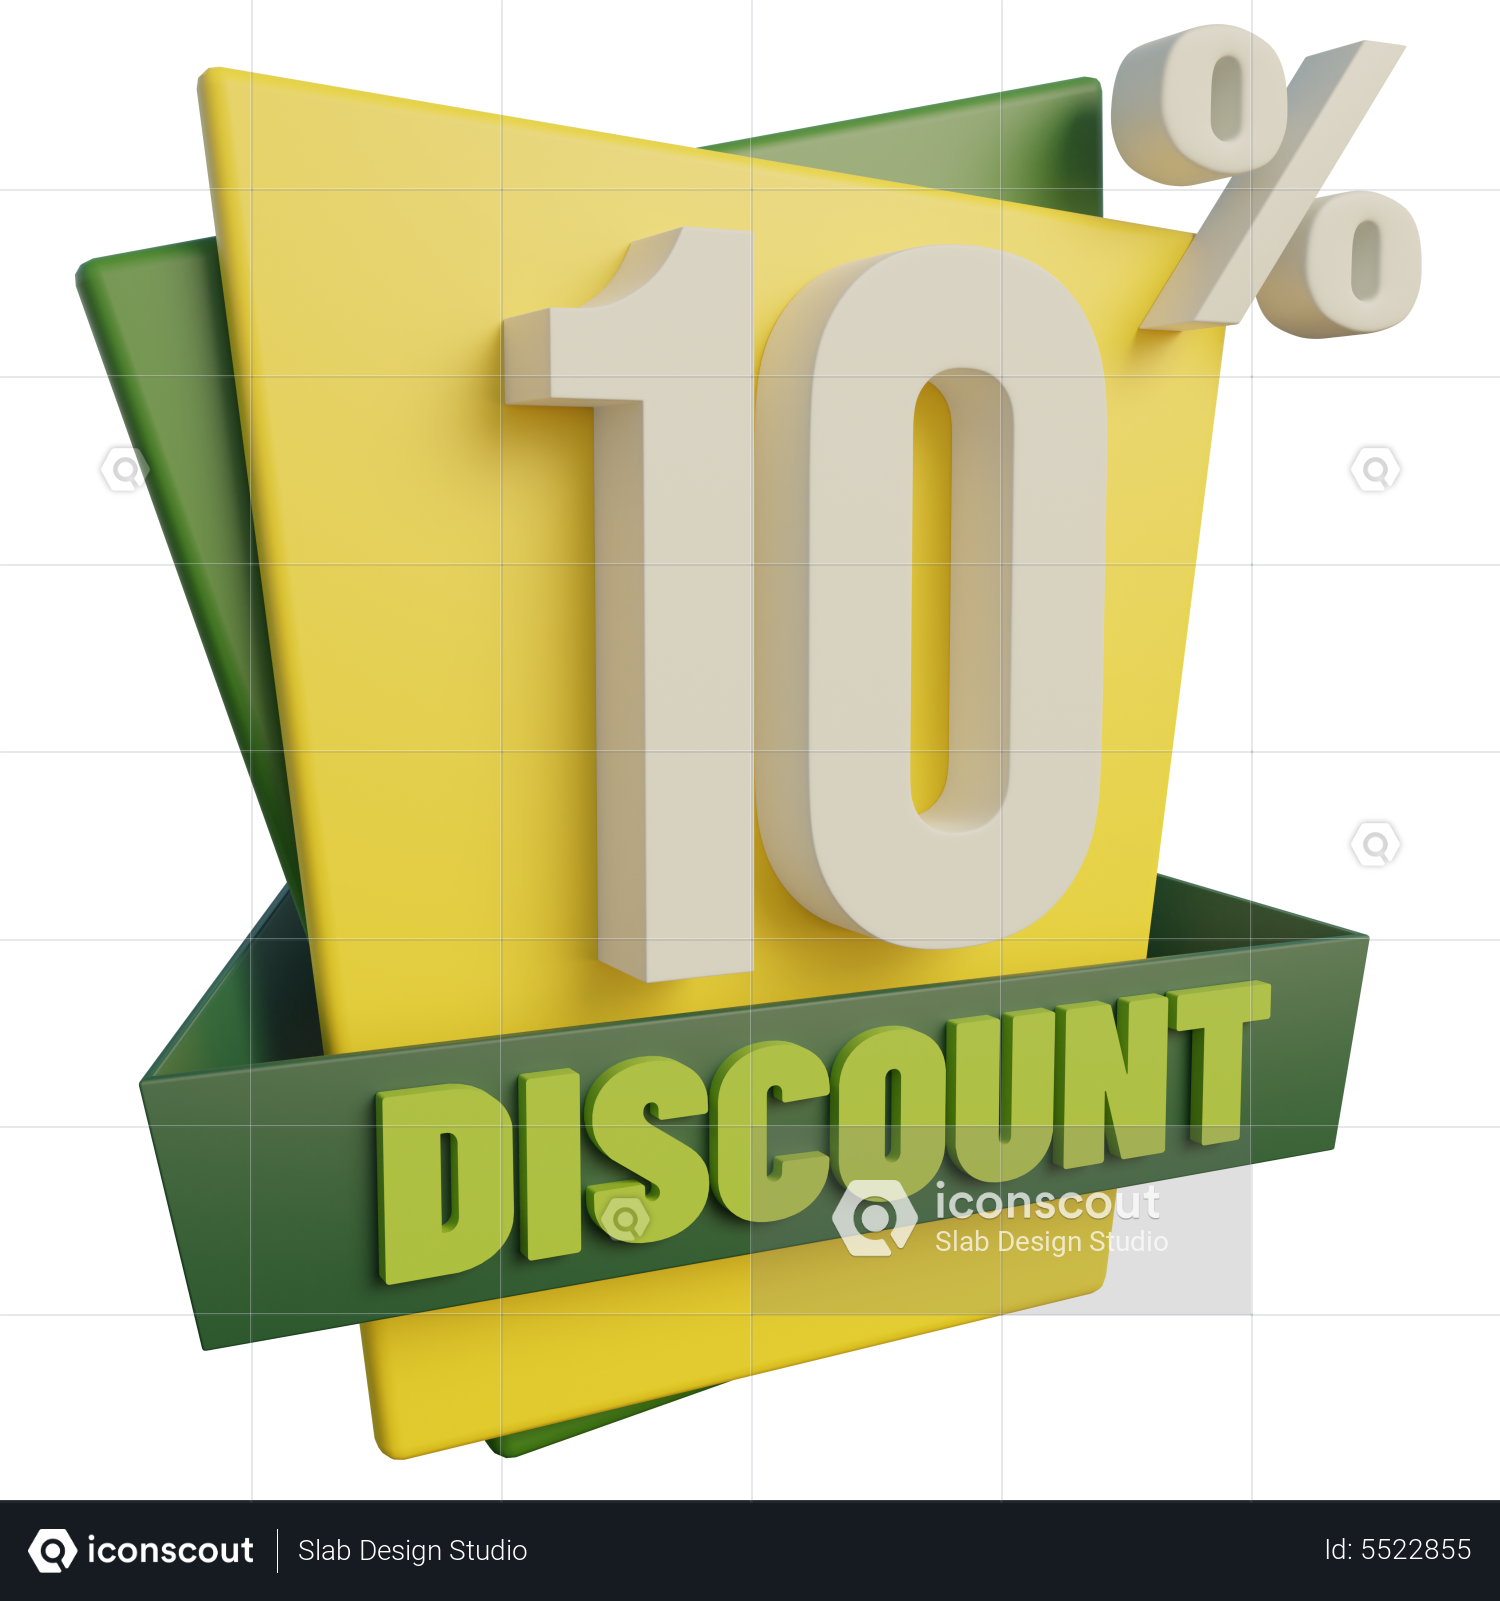 10 Percent Off - 2474 - Dryicons